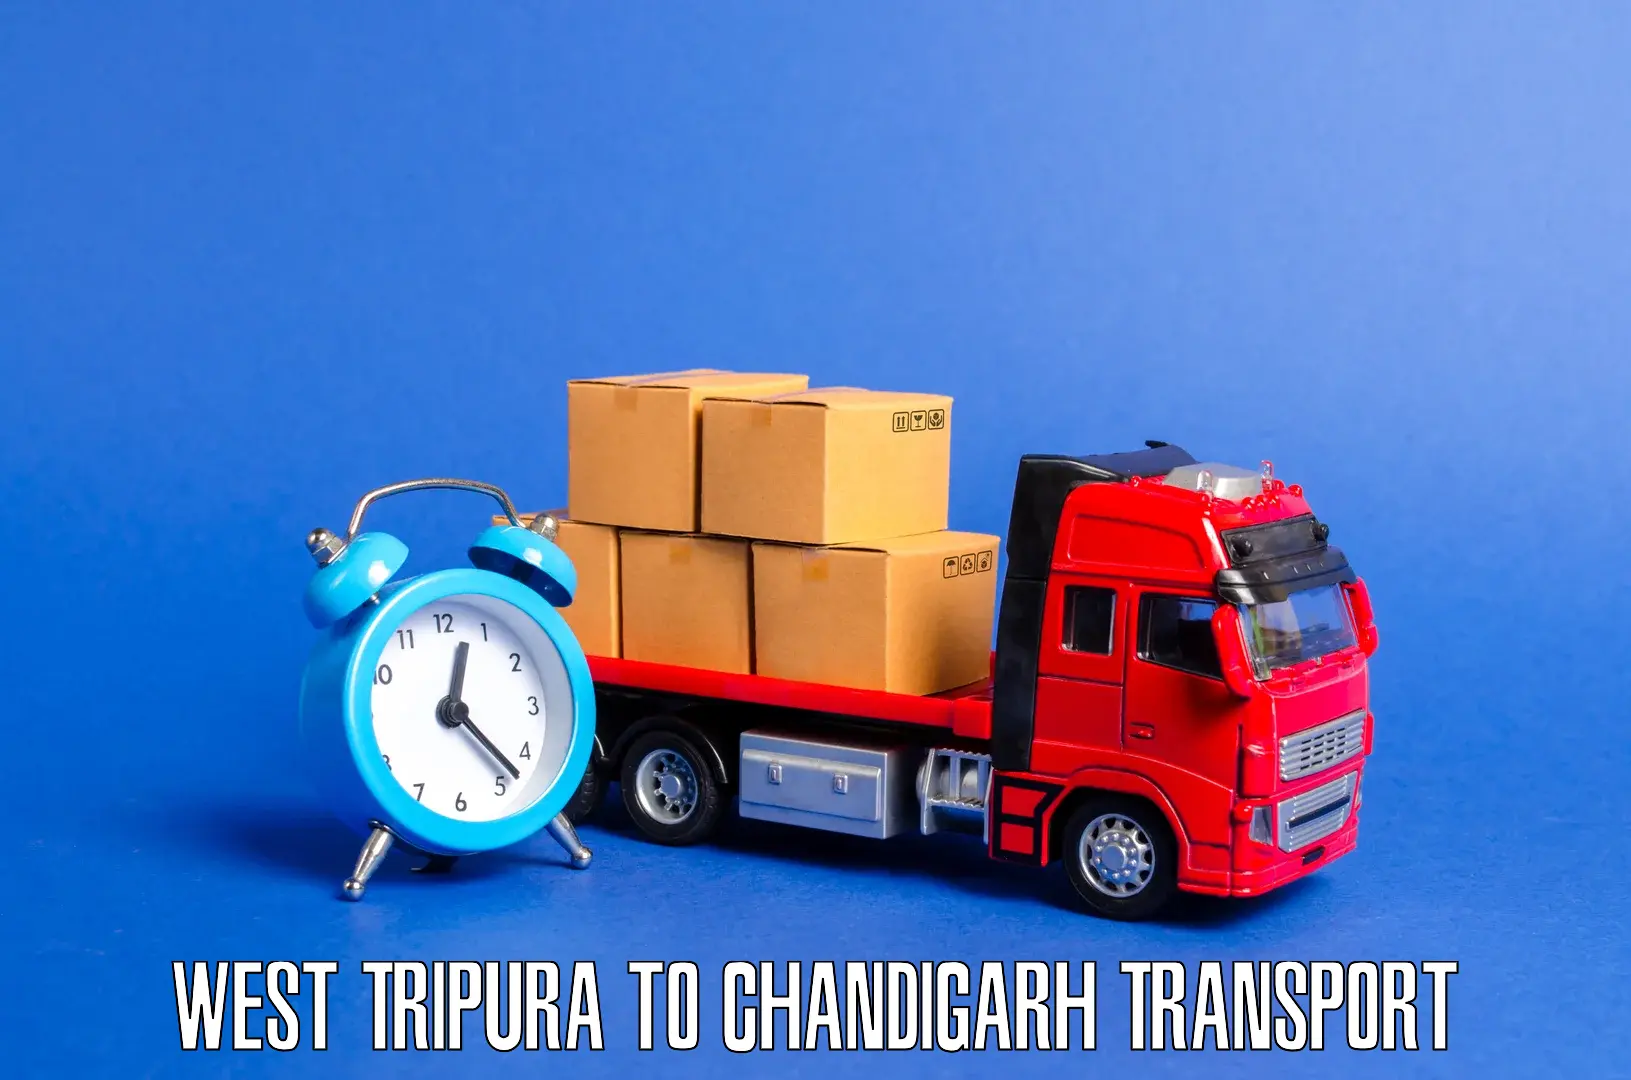 Lorry transport service in West Tripura to Chandigarh